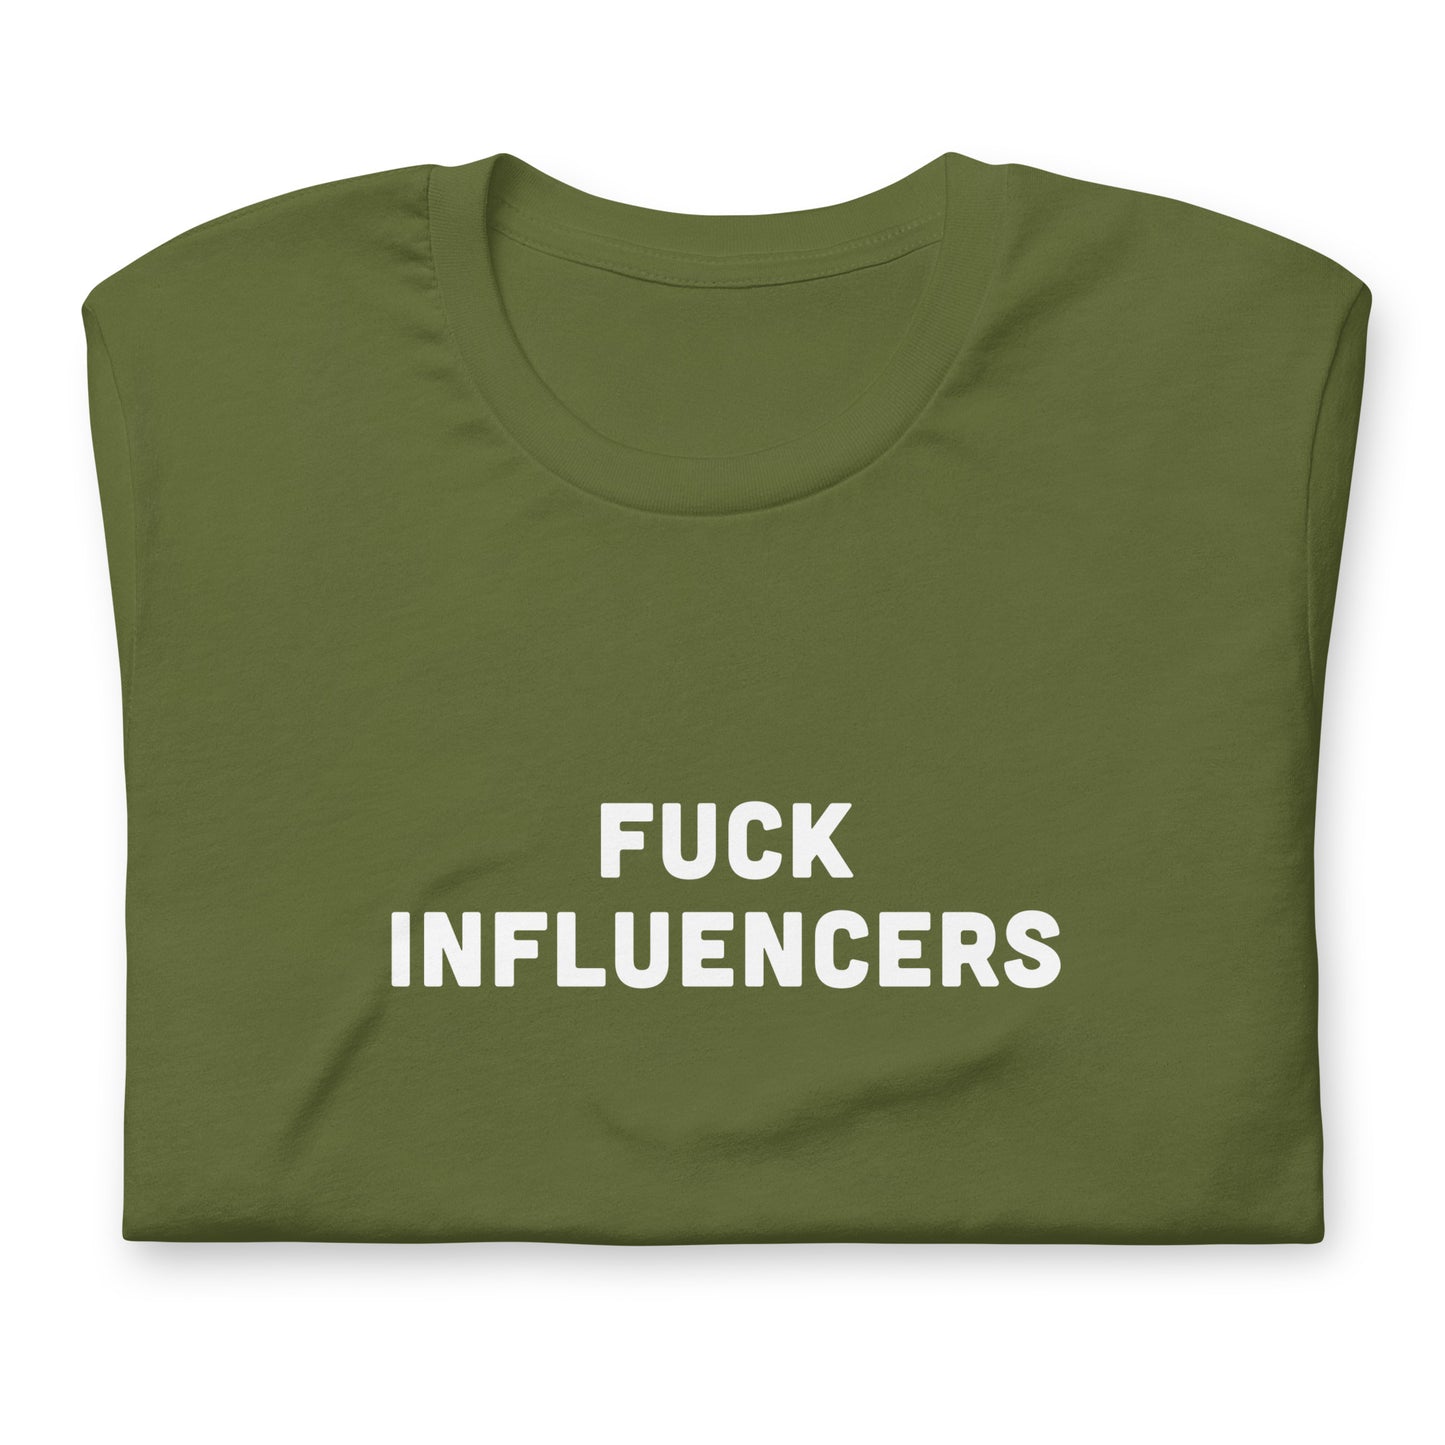 Fuck Influencers T-Shirt Size S Color Navy